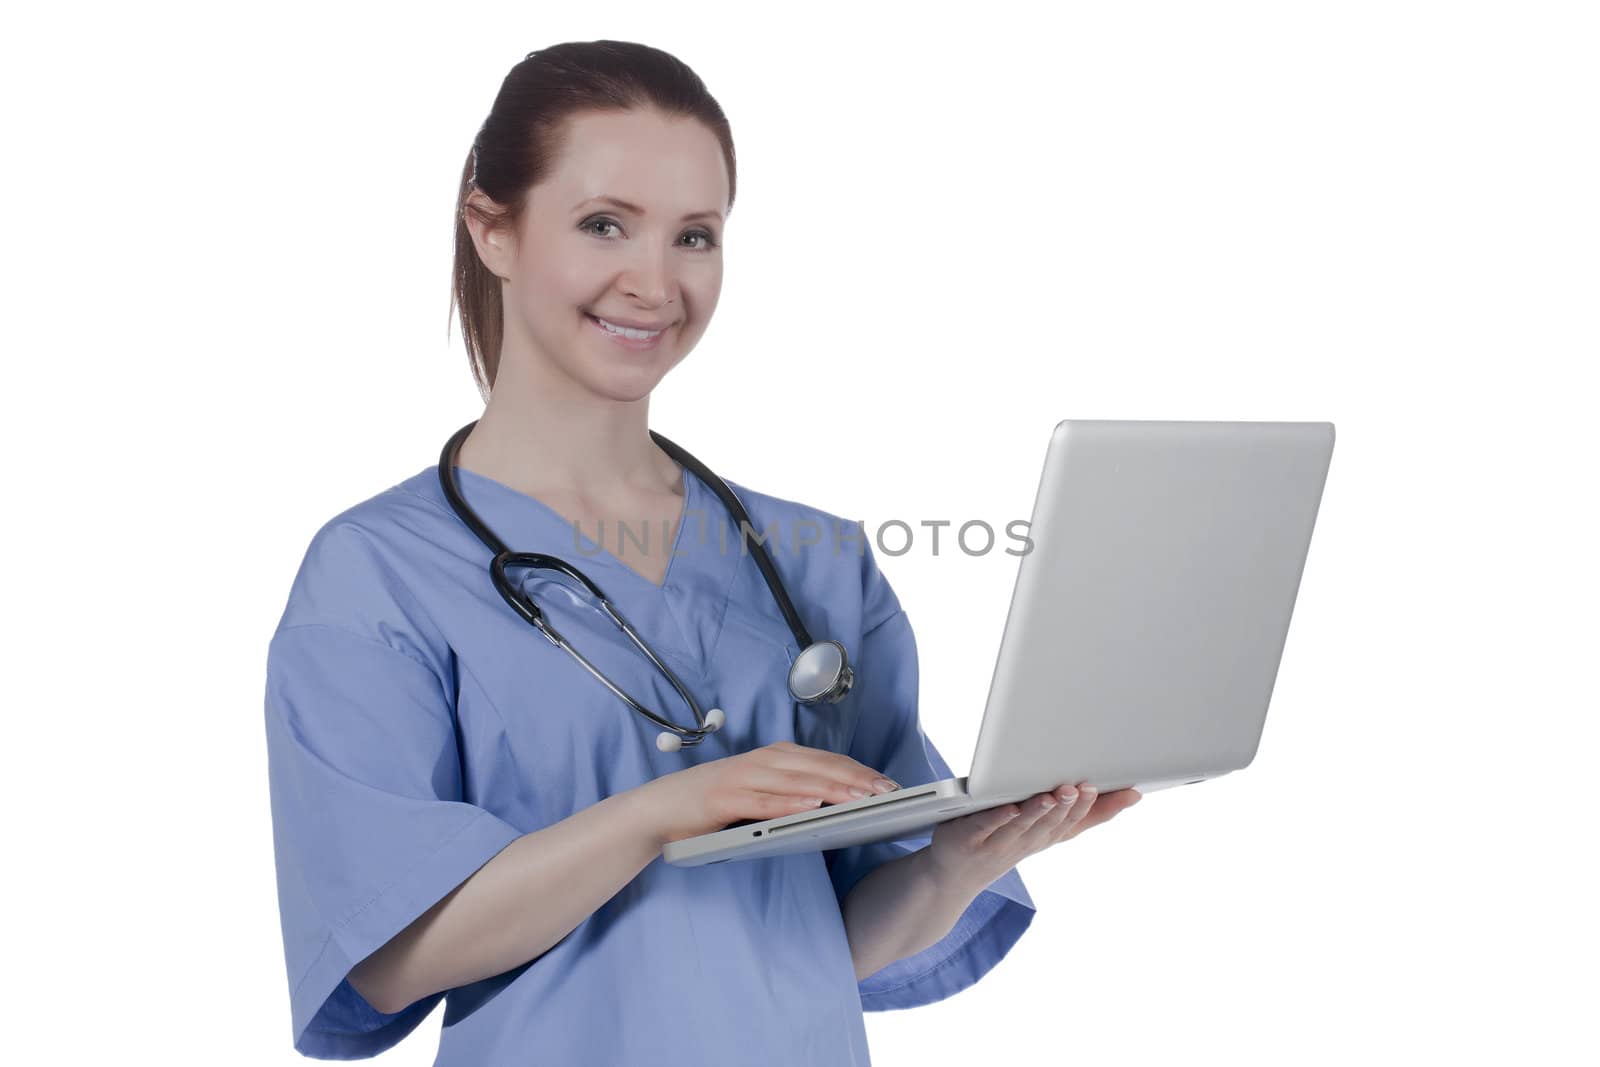 Smiling physician holding a laptop